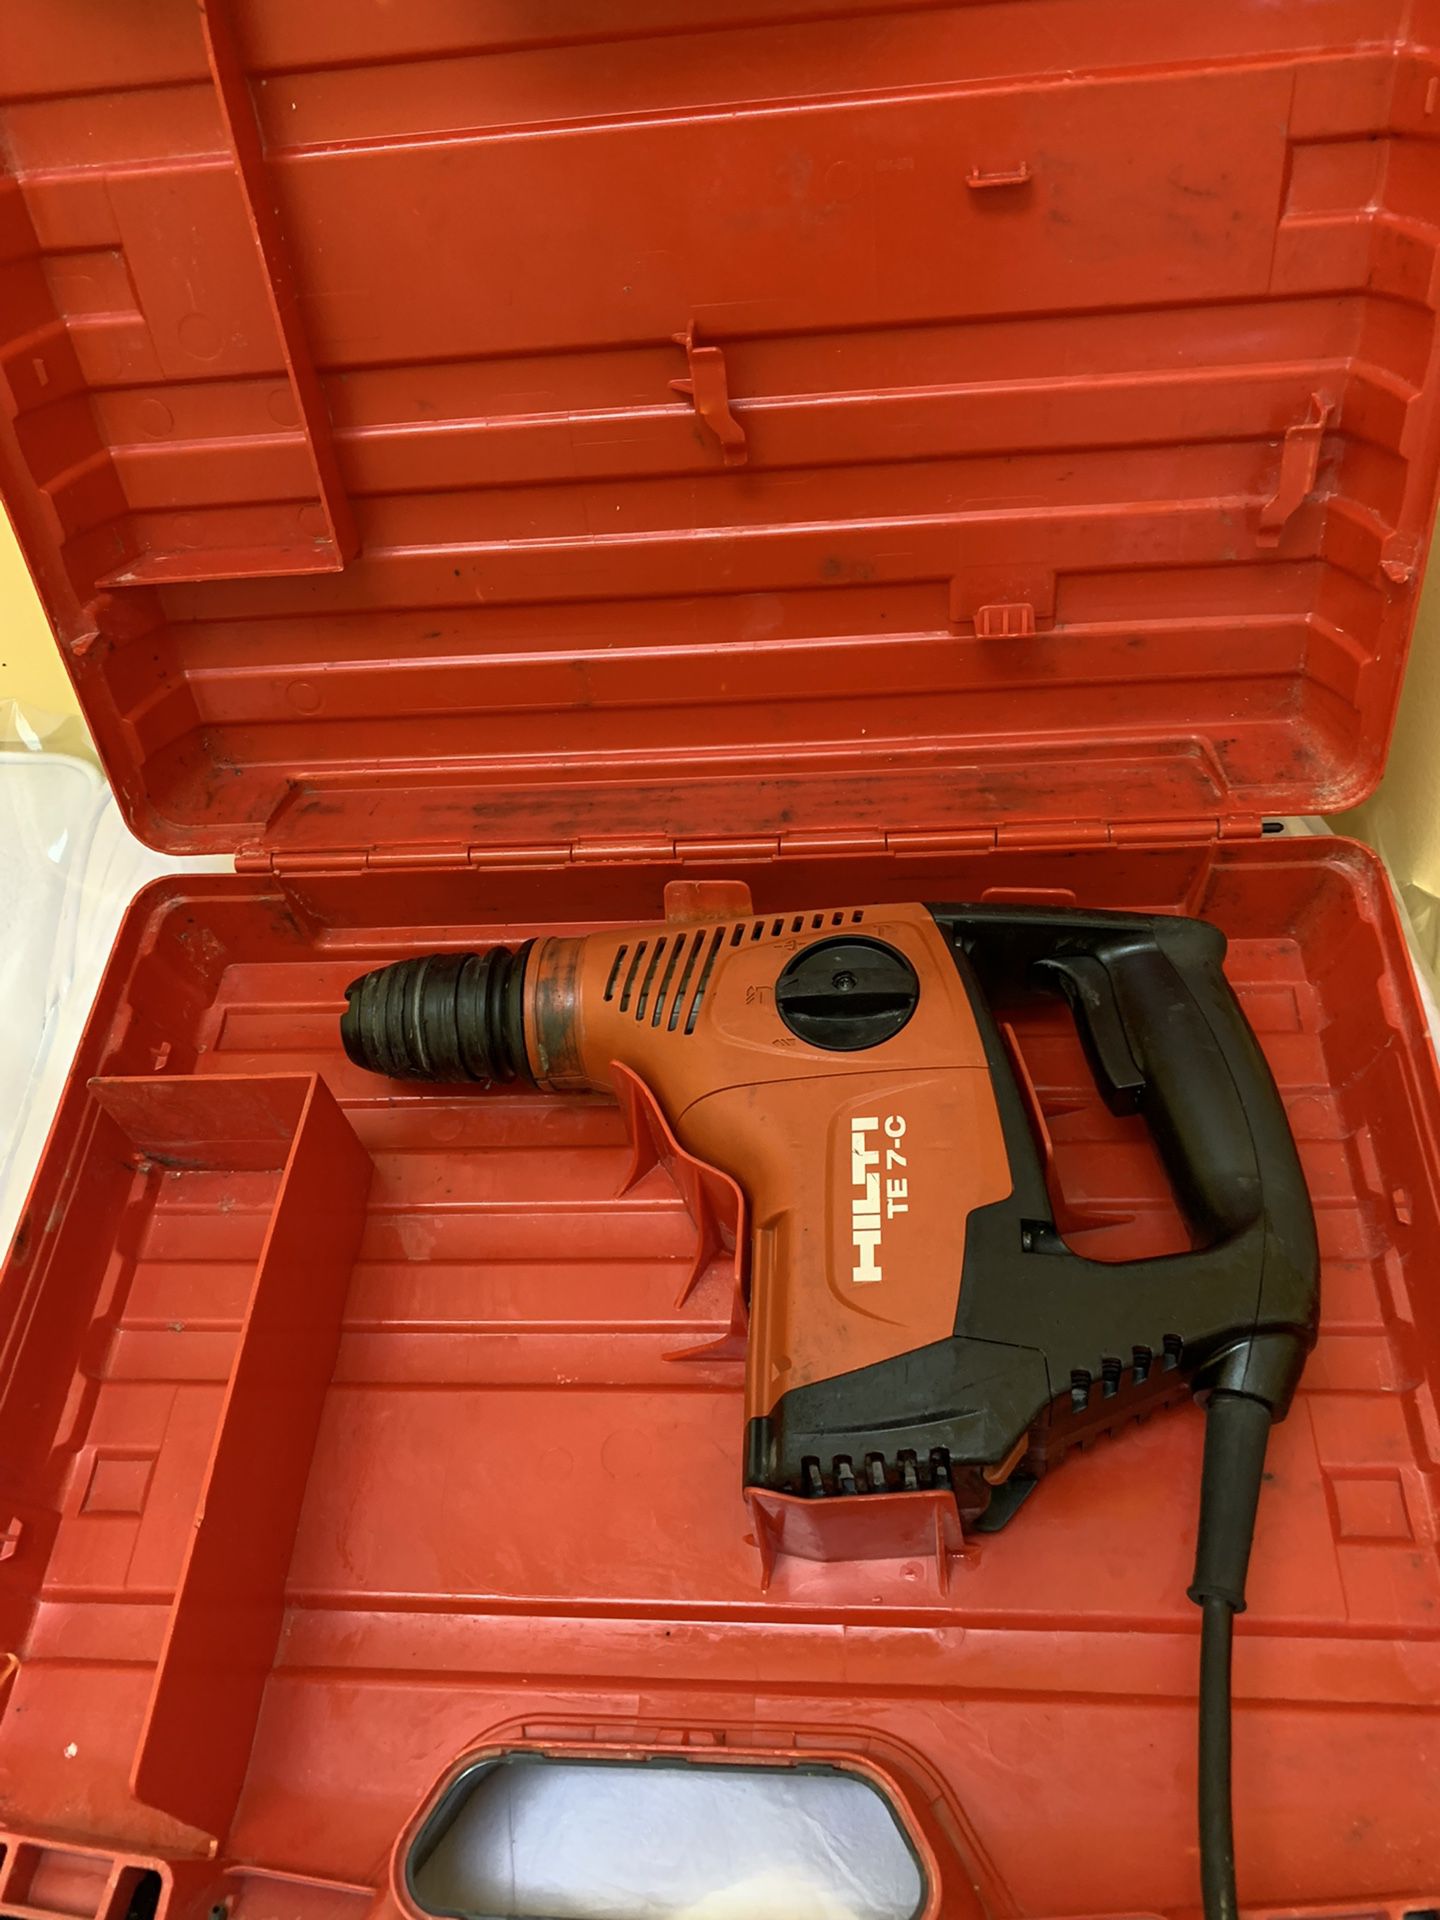 Hilti TE 7-C 120V Rotary Hammer Performance for Sale in Brentwood, NC  OfferUp